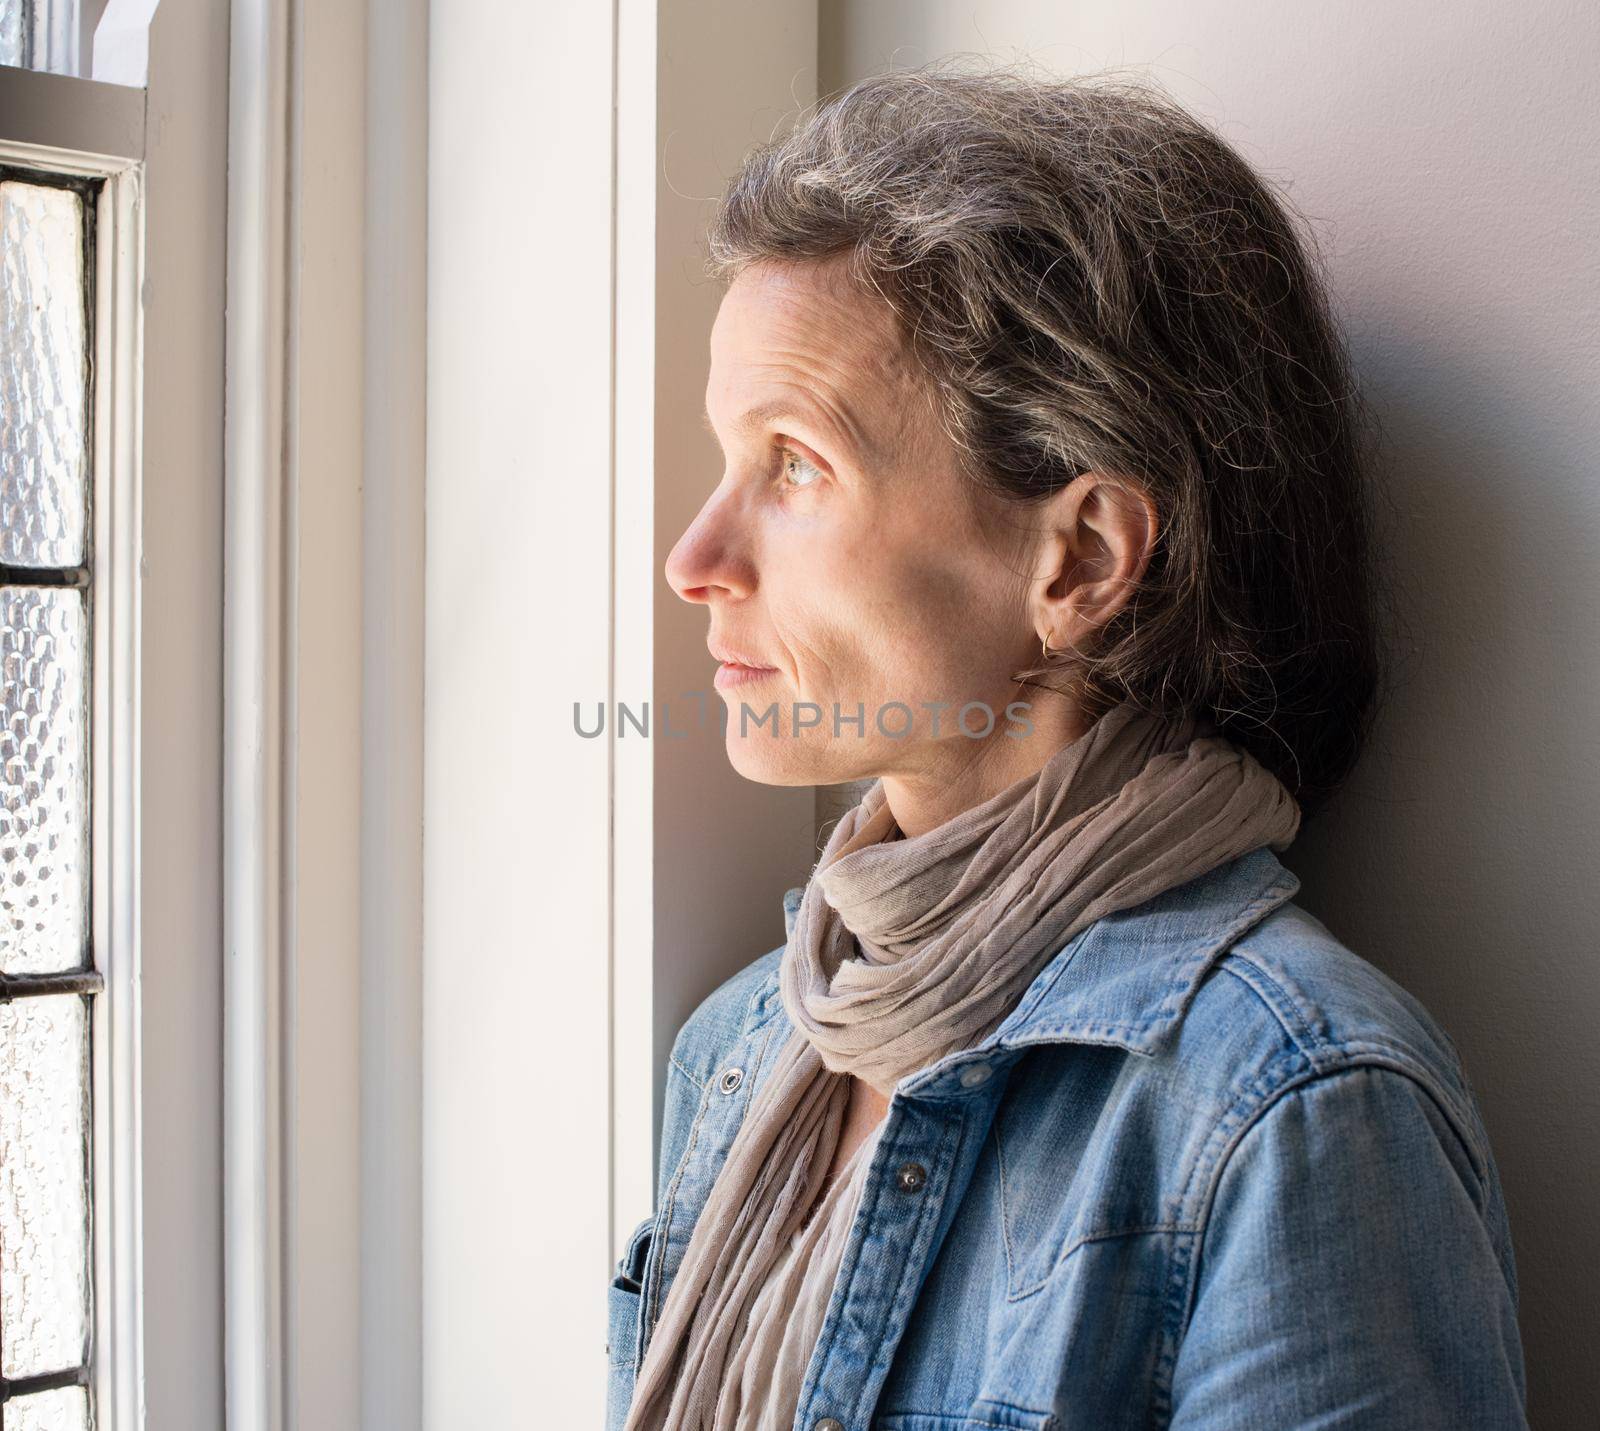 Profile view of middle aged woman with grey hair and scarf and denim shirt next to window looking pensive by natalie_board